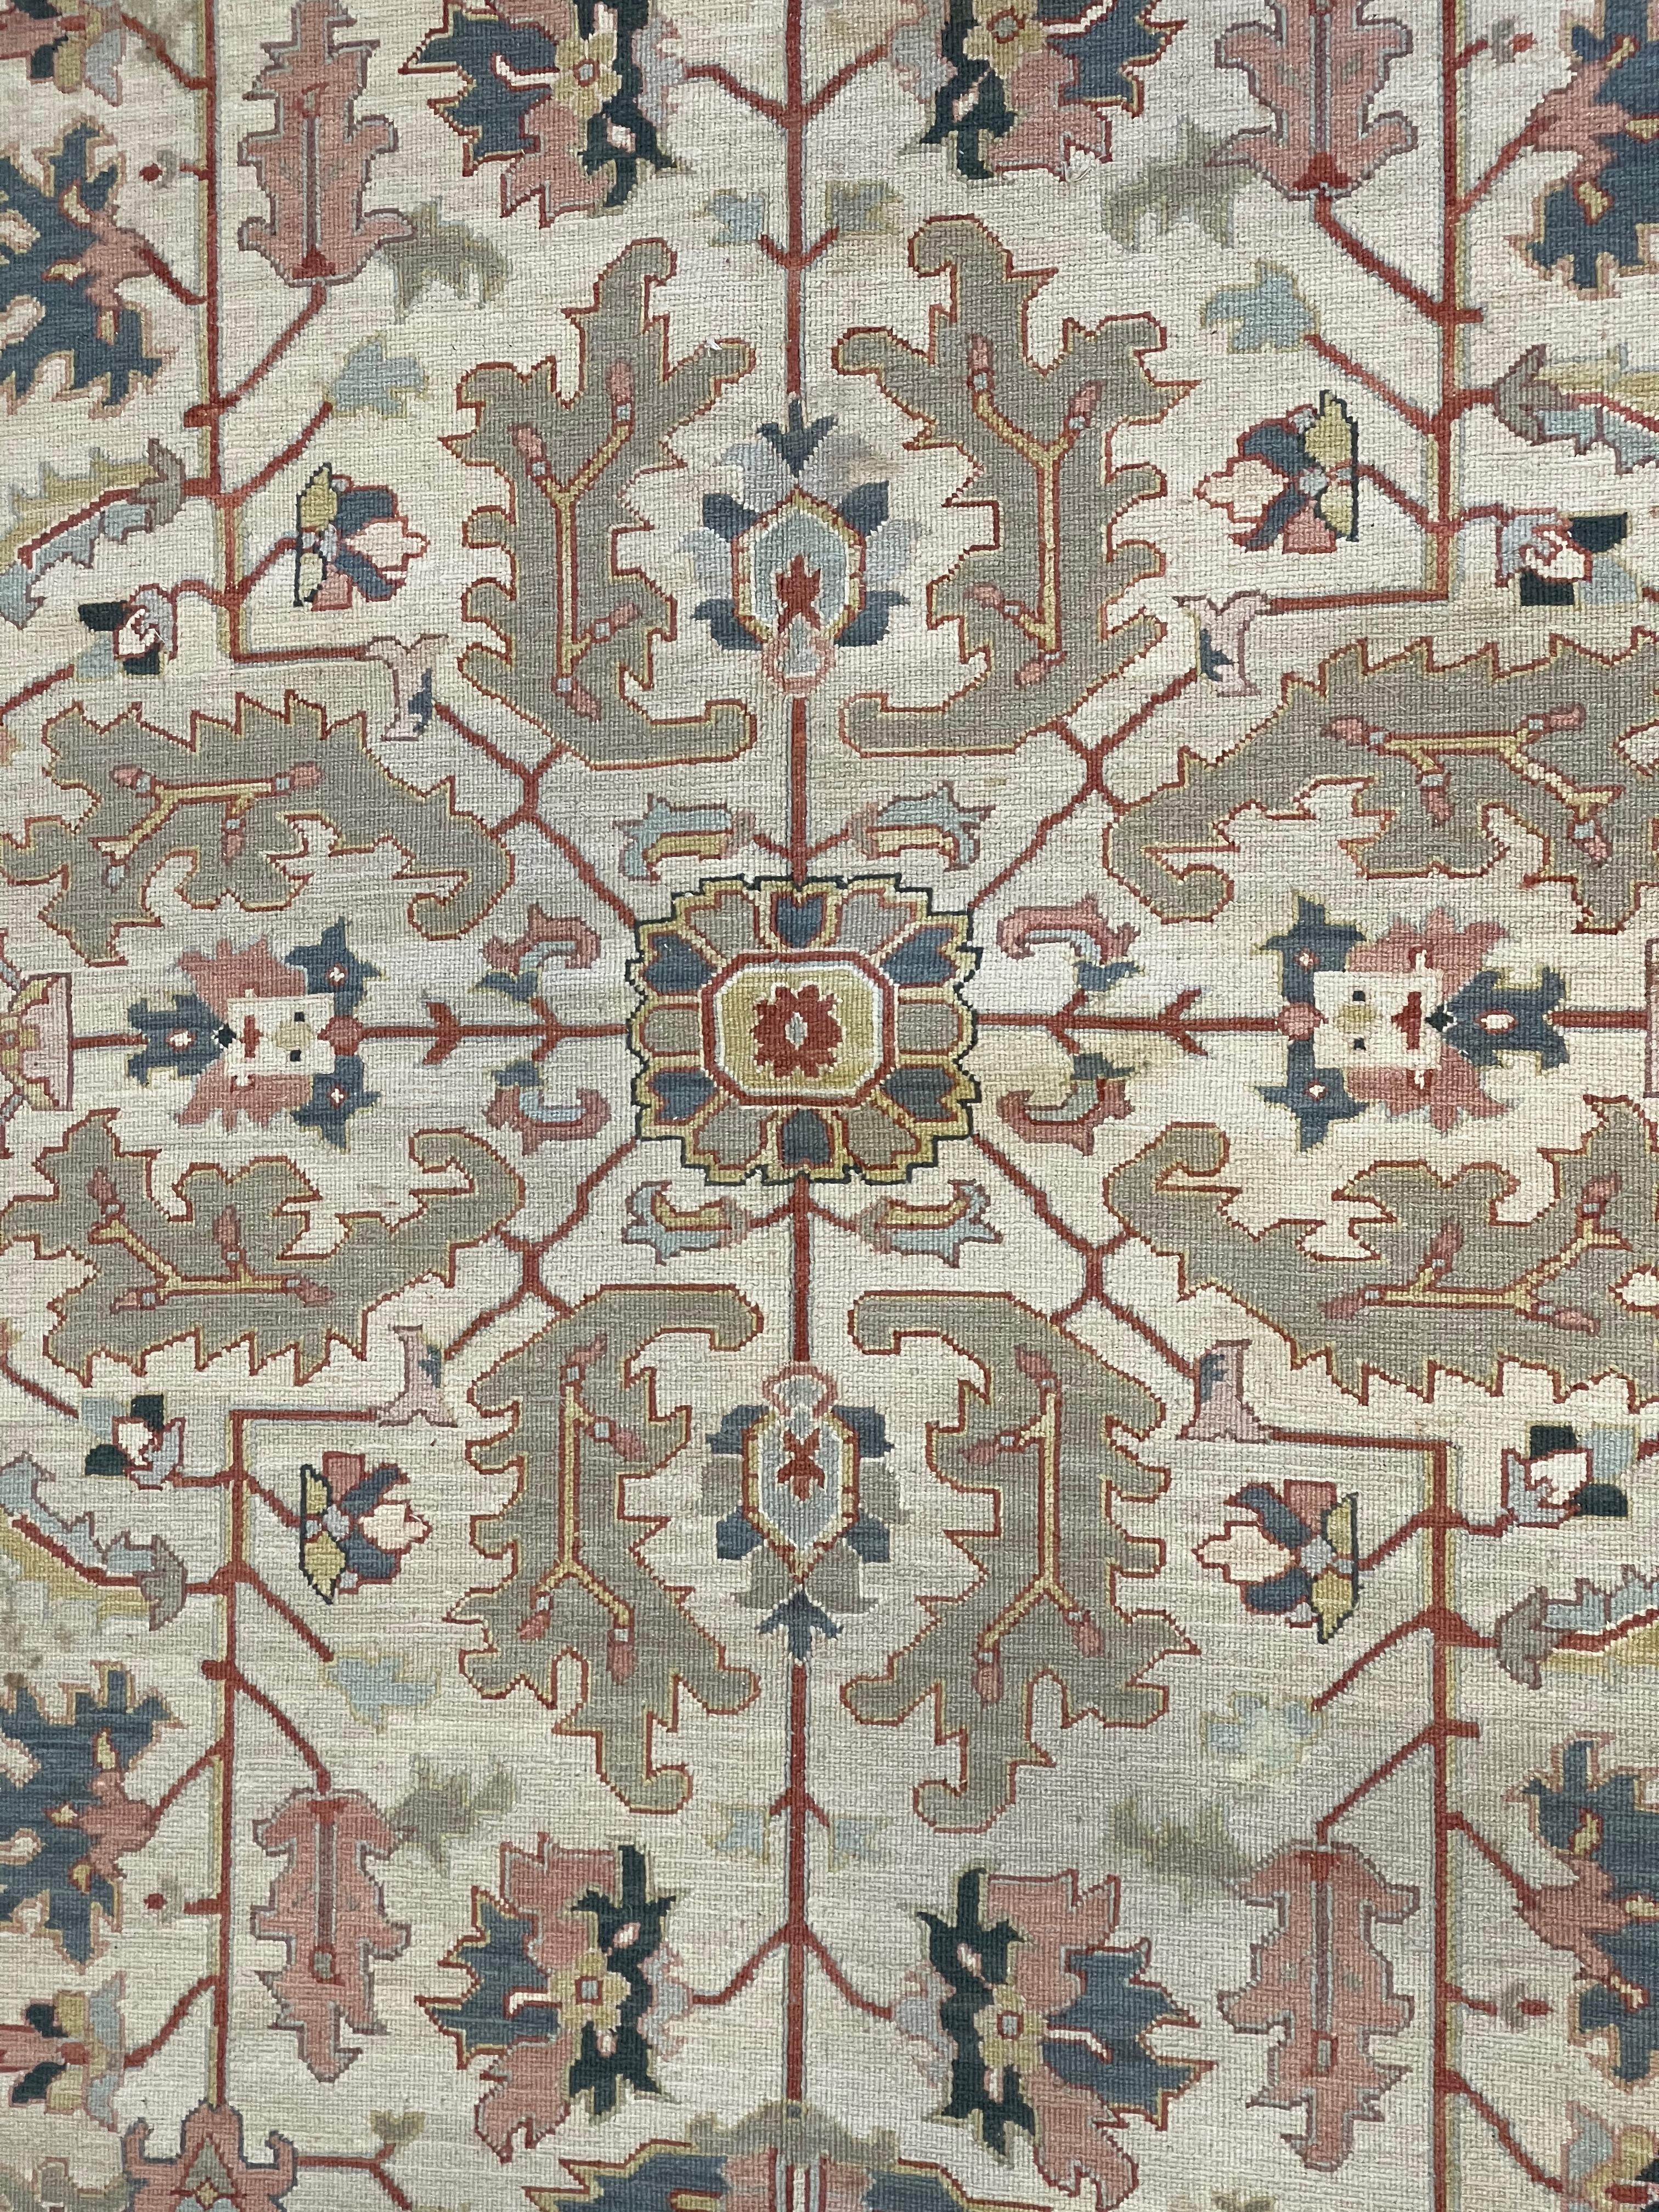 Very fine semi-antique hand knotted Heriz Serapi Soumak carpet medium low dense silky wool pile on cotton weft. Field with central complex multi-color medallion with extensions and floral designs on ivory background; wide borders with floral motifs